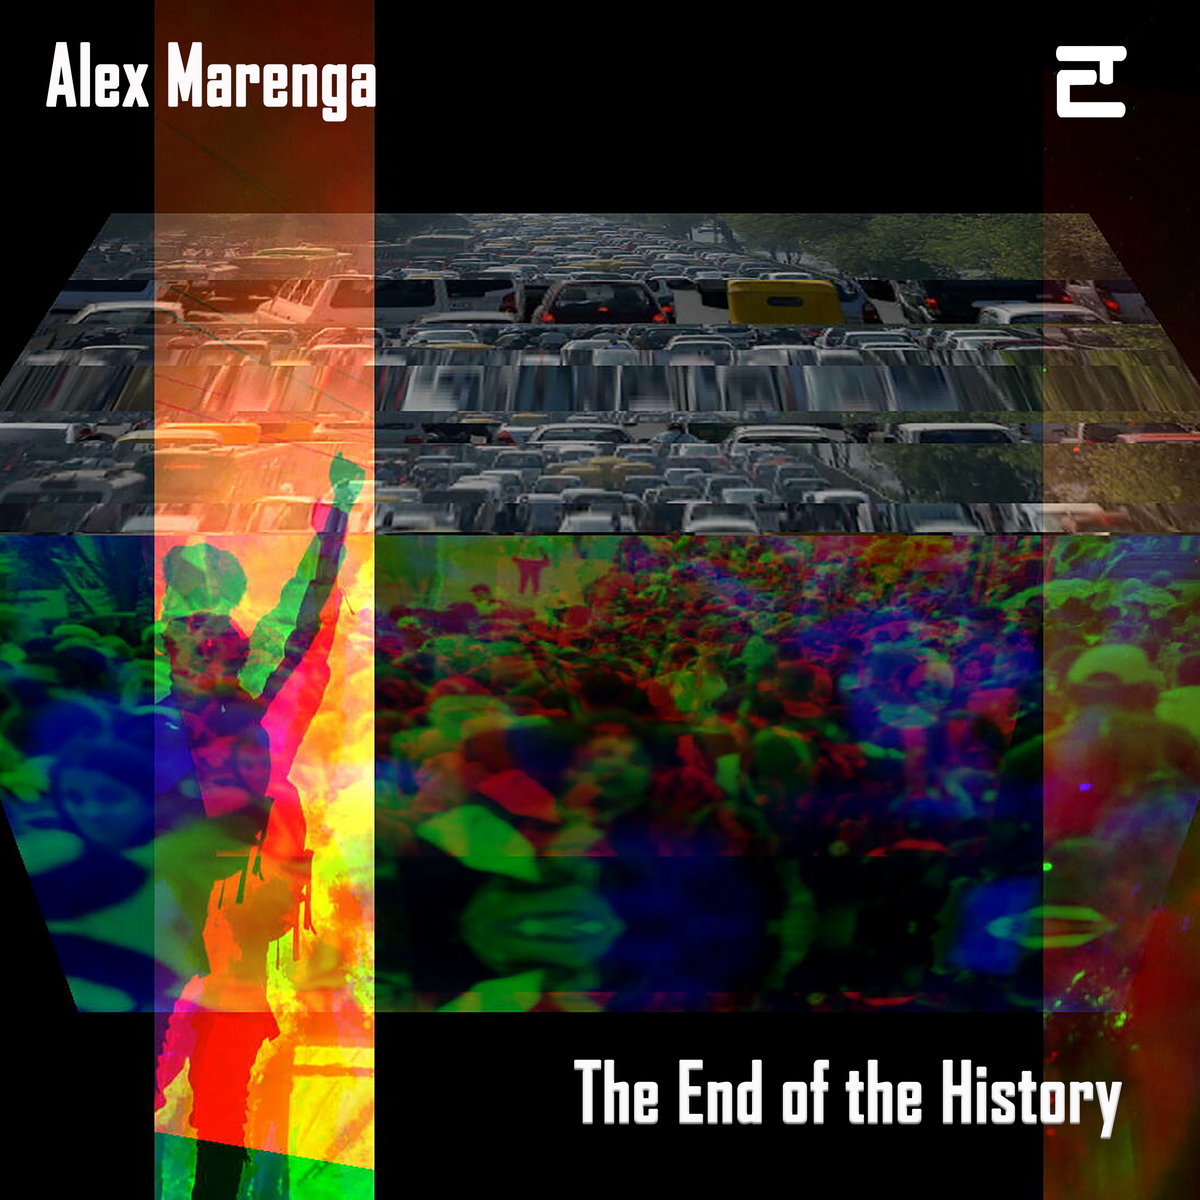 Videos from Alex Marenga’s album The End of The History